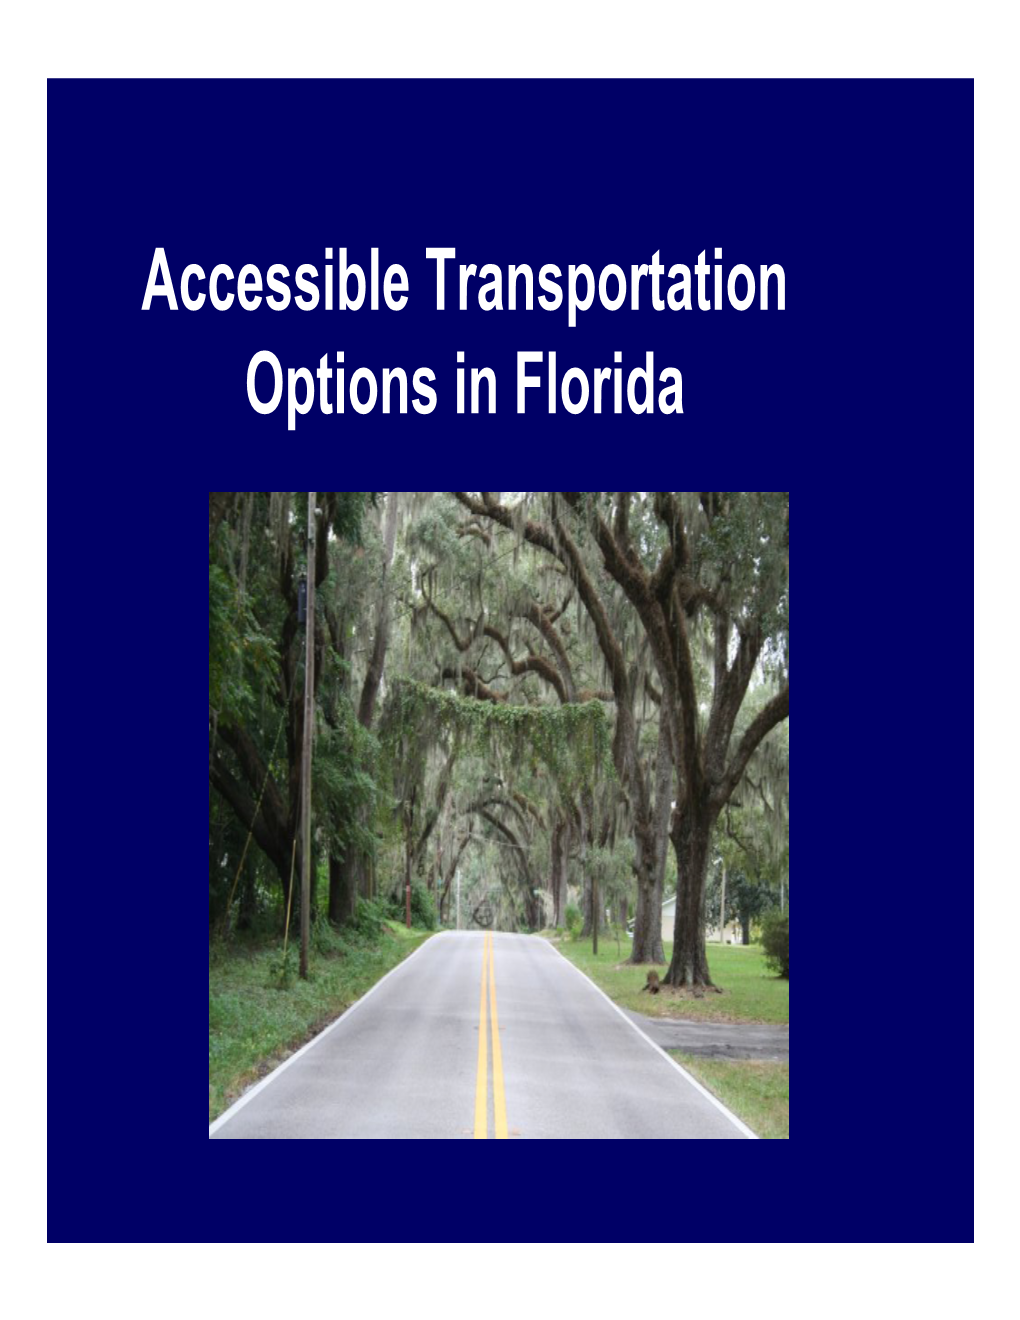 Accessible Transportation Options in Florida